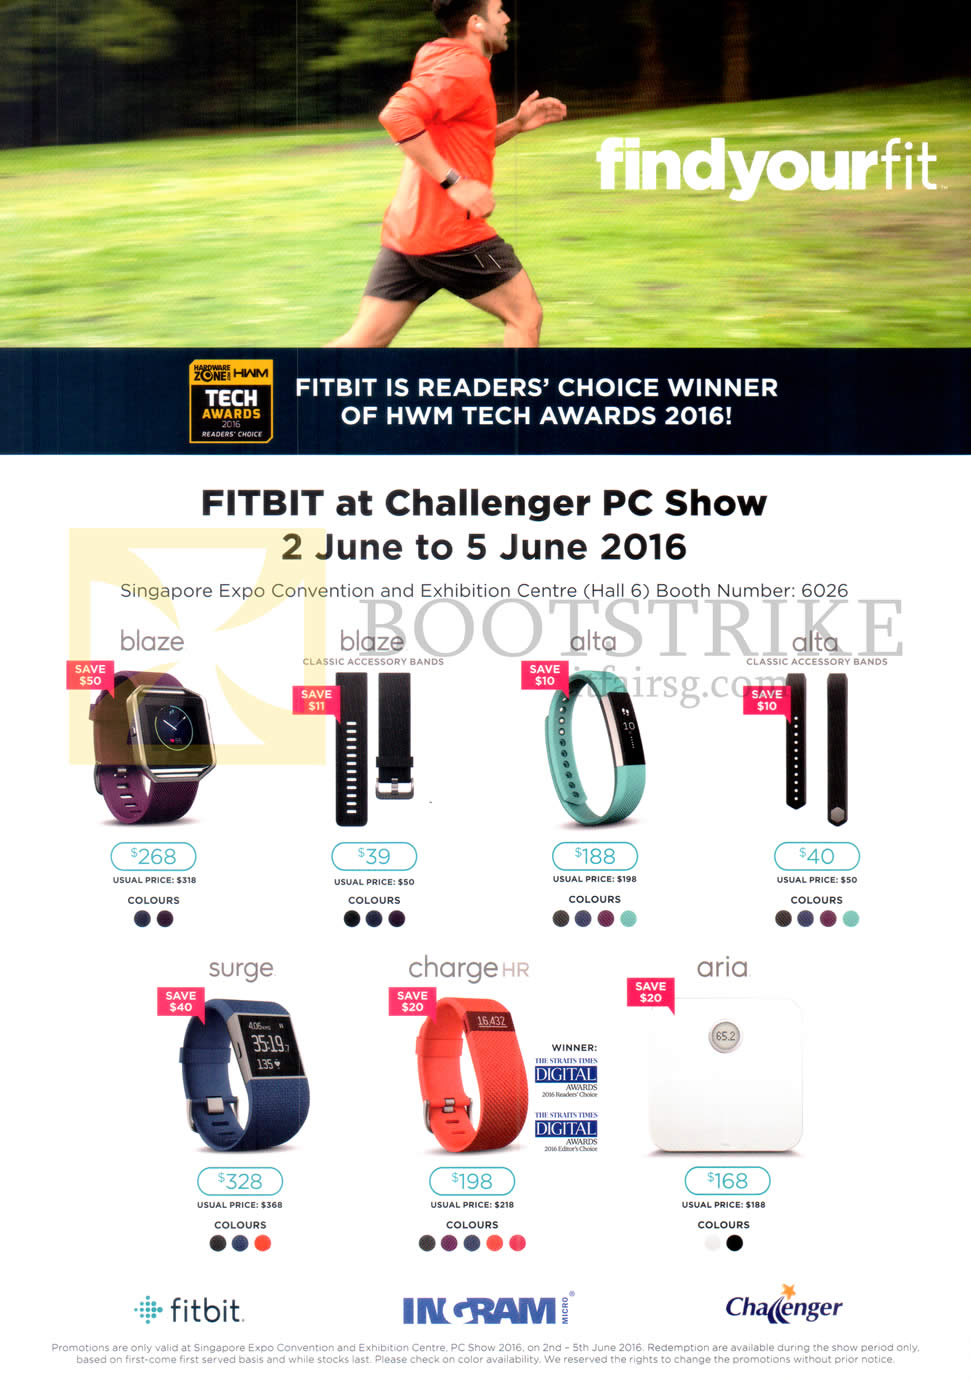 PC SHOW 2016 price list image brochure of Challenger Fitbit Fitness Trackers Blaze, Alta, Surge, Charge HR, Aria